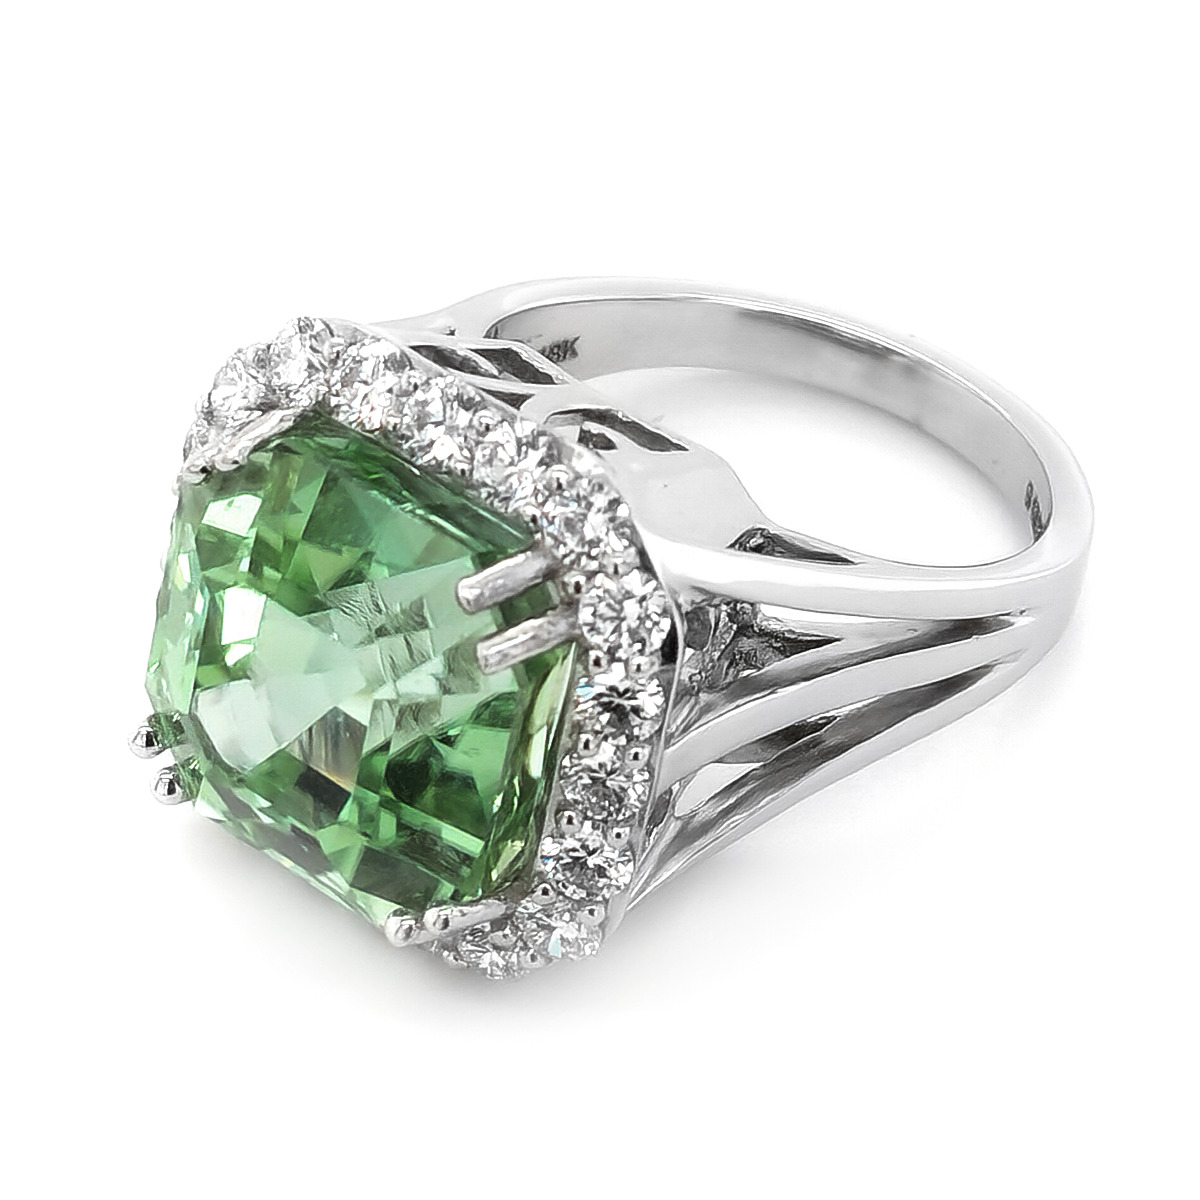 Mint Tourmaline 12.65 carats set in 18K White Gold Ring with 1.27 ...